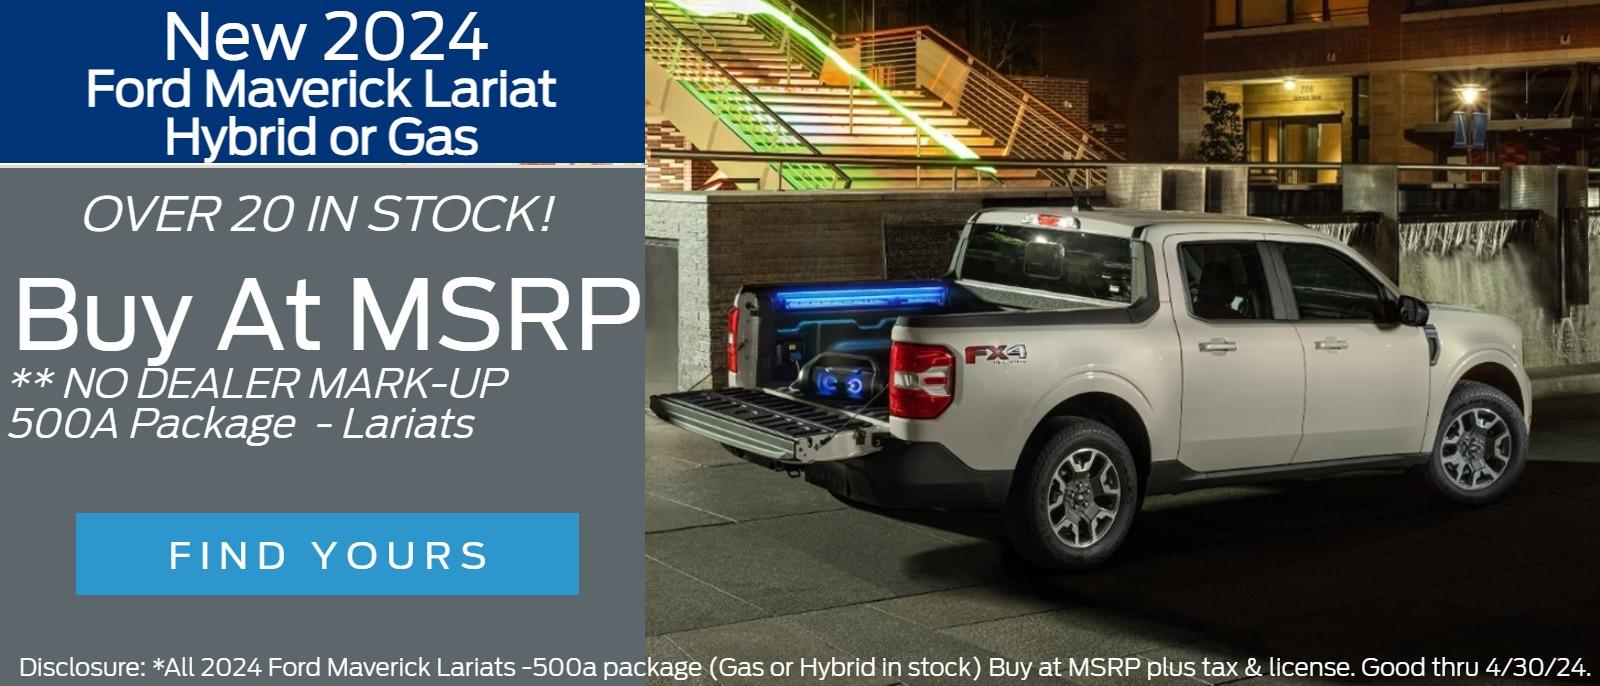 New 2024
Ford Maverick Lariat
Hybrid or Gas          
OVER 20 IN STOCK!
 Buy at MSRP 
** NO DEALER MARK-UP  - 500A Package  - Lariats 

Disclosure: *All 2024 Ford Maverick Lariats -500a package (Gas or Hybrid in stock) Buy at MSRP plus tax & license. Good thru 4/30/24.